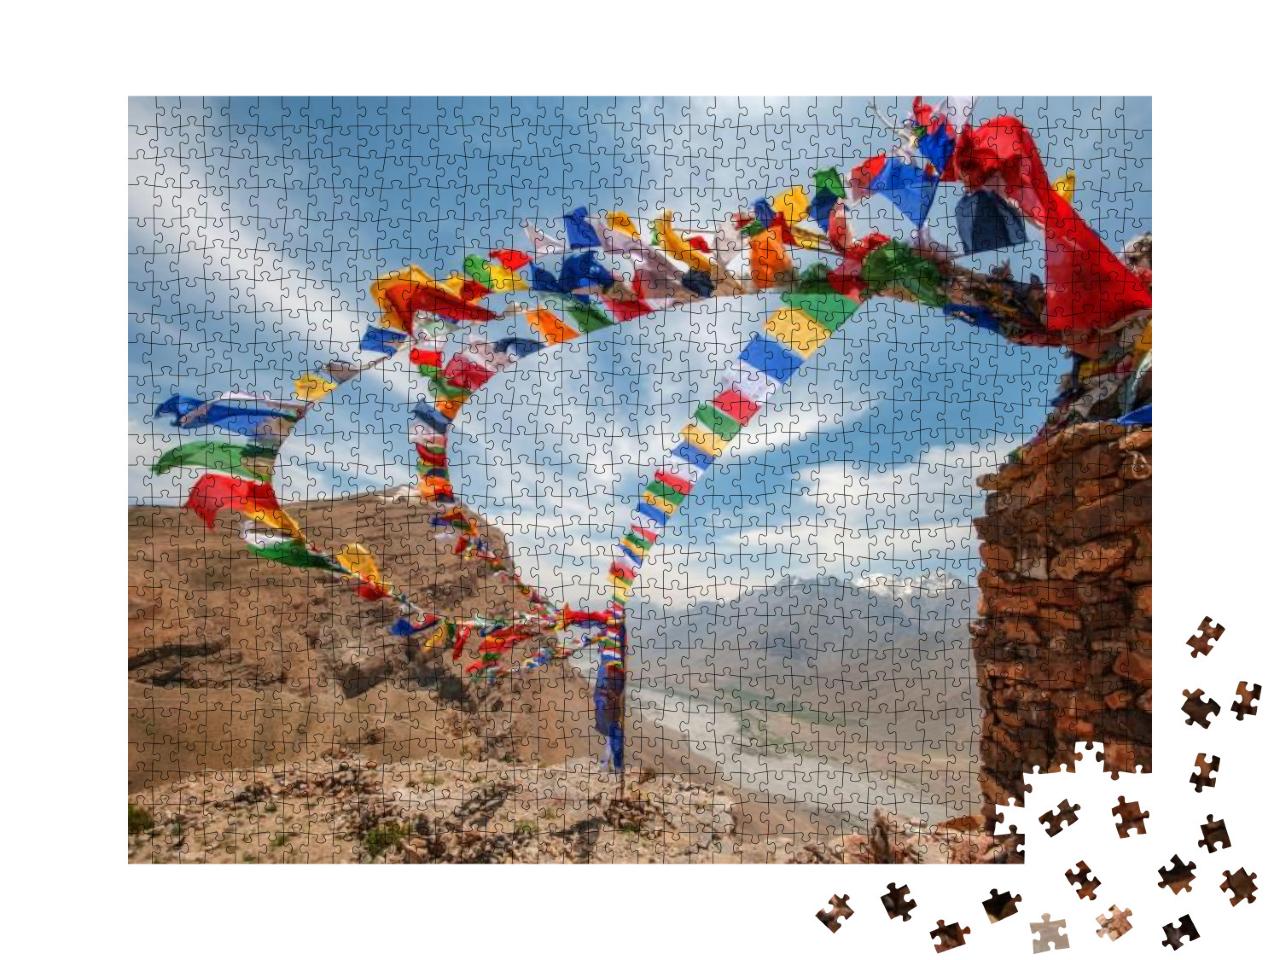 Tibetan Flags with Mantra on Sky Background... Jigsaw Puzzle with 1000 pieces